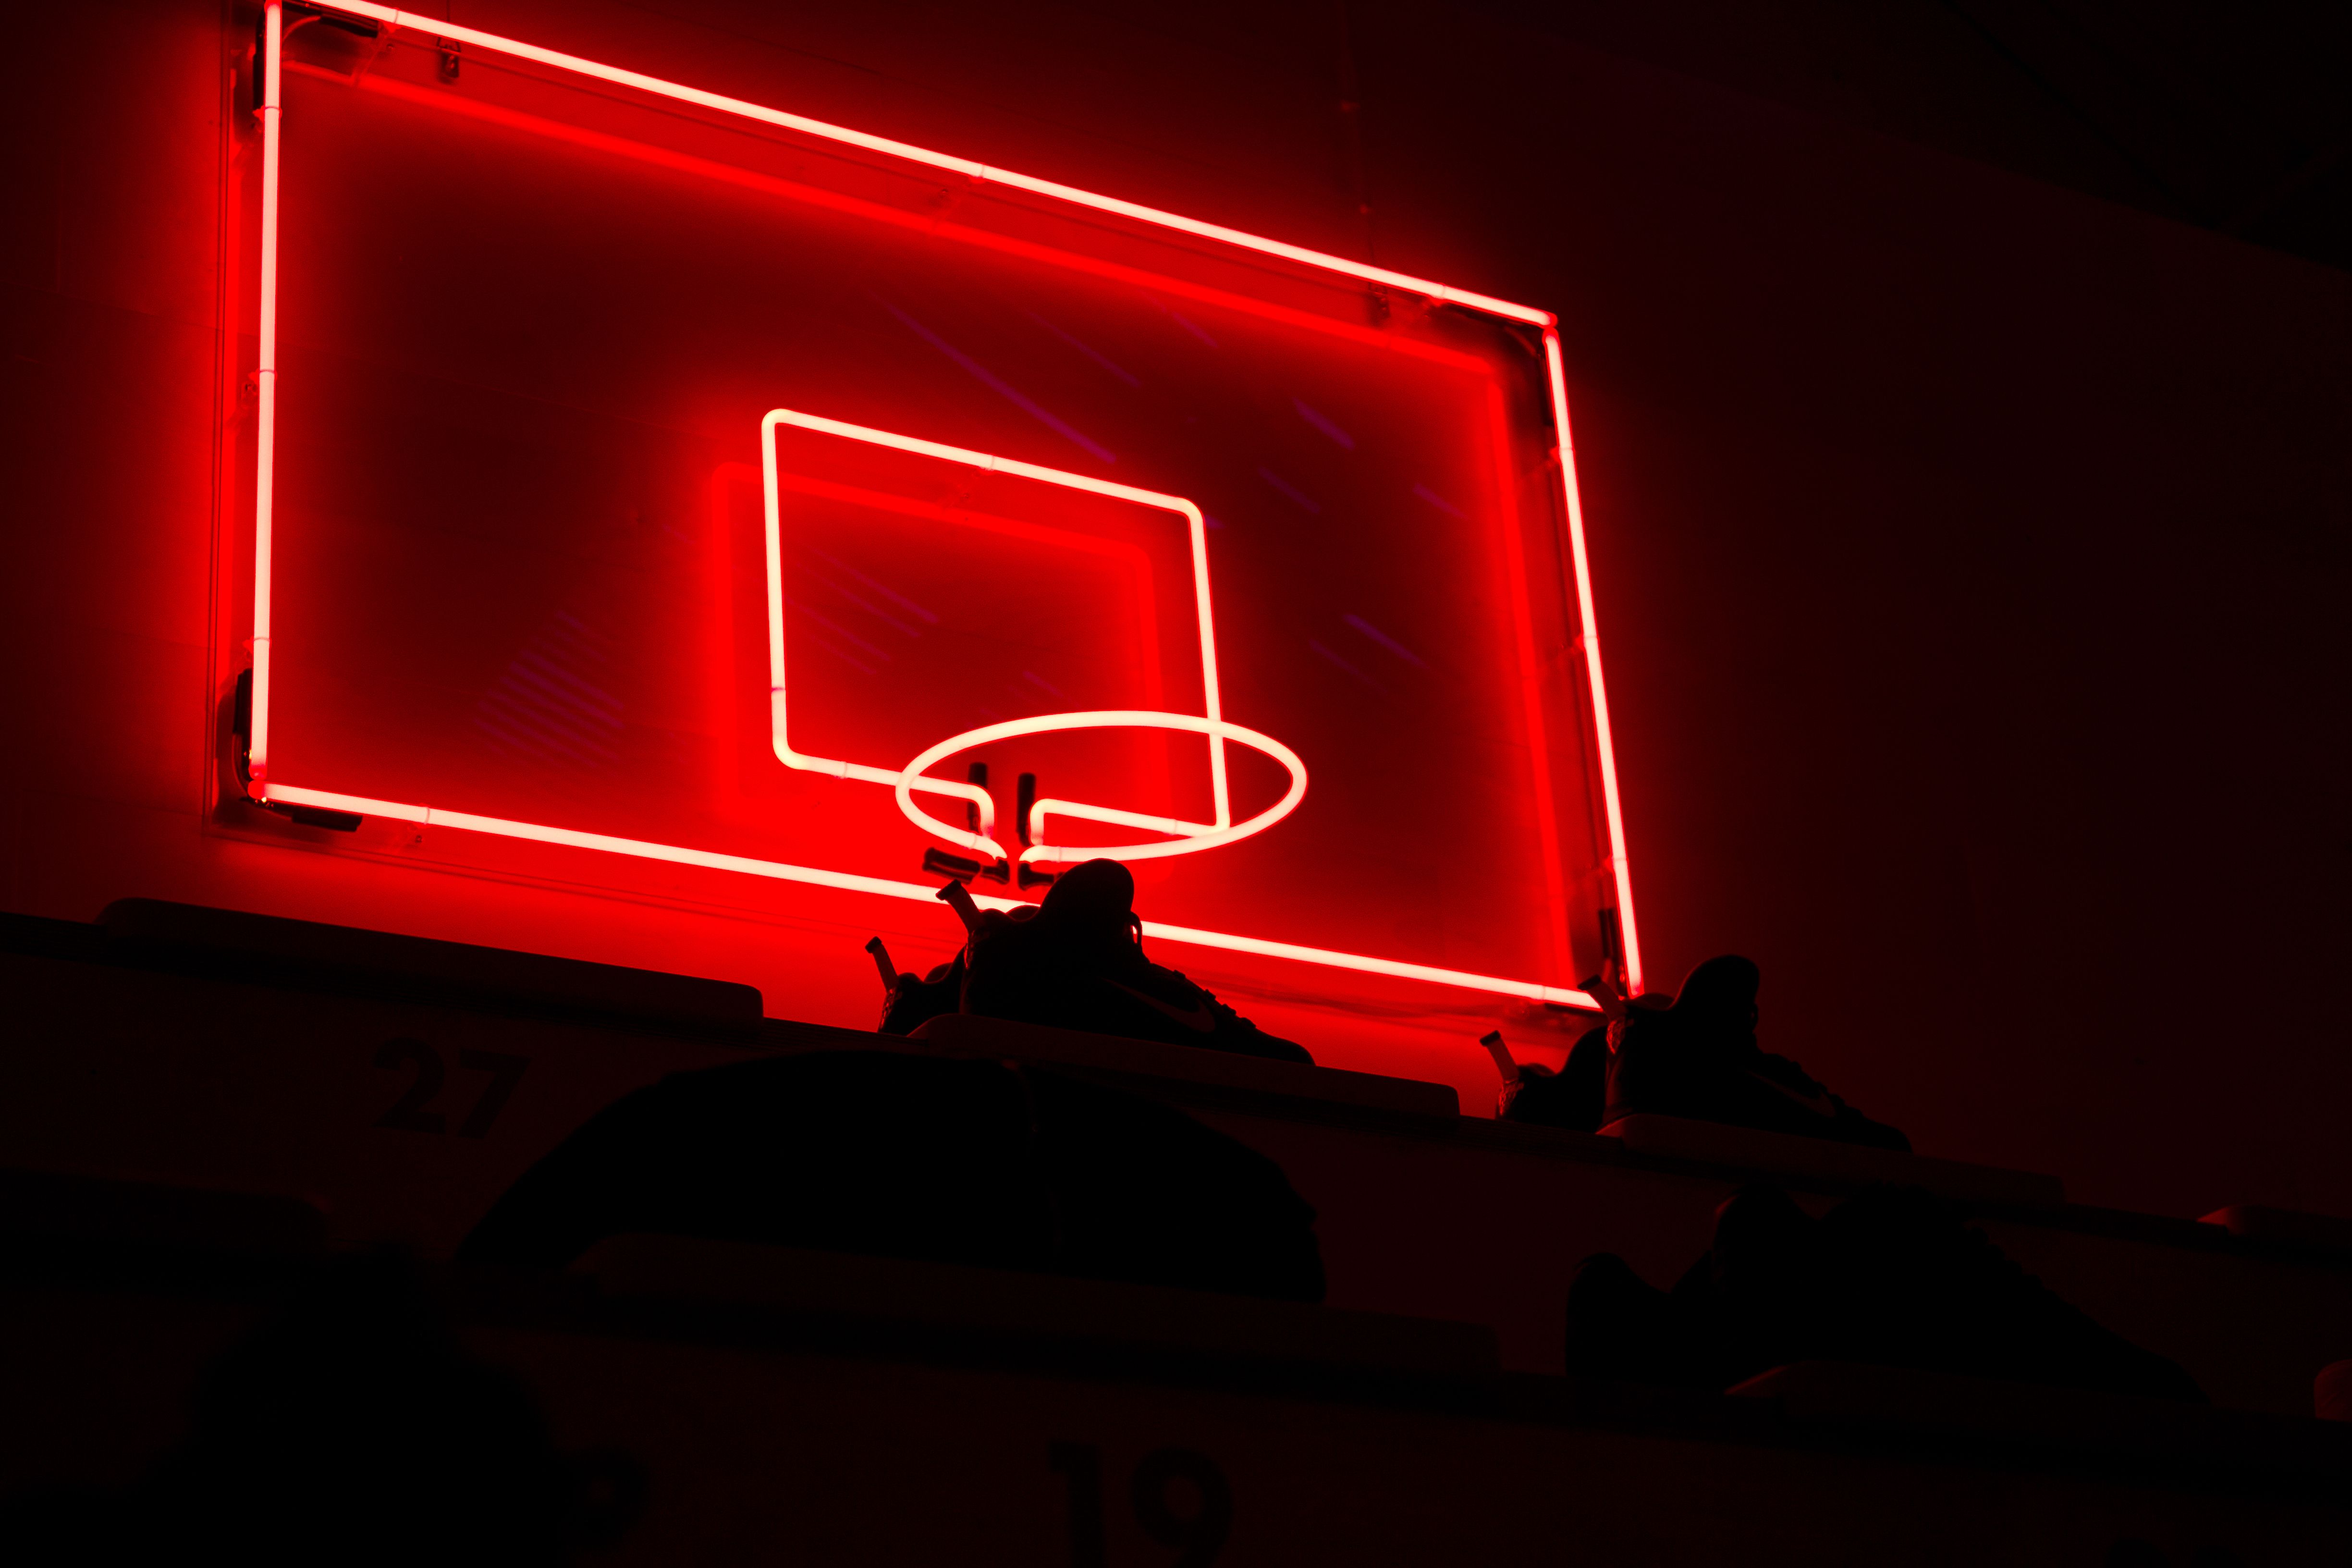 Lebron Neon Basketball Hoop. Neon wallpaper, Black and white picture wall, Red wallpaper